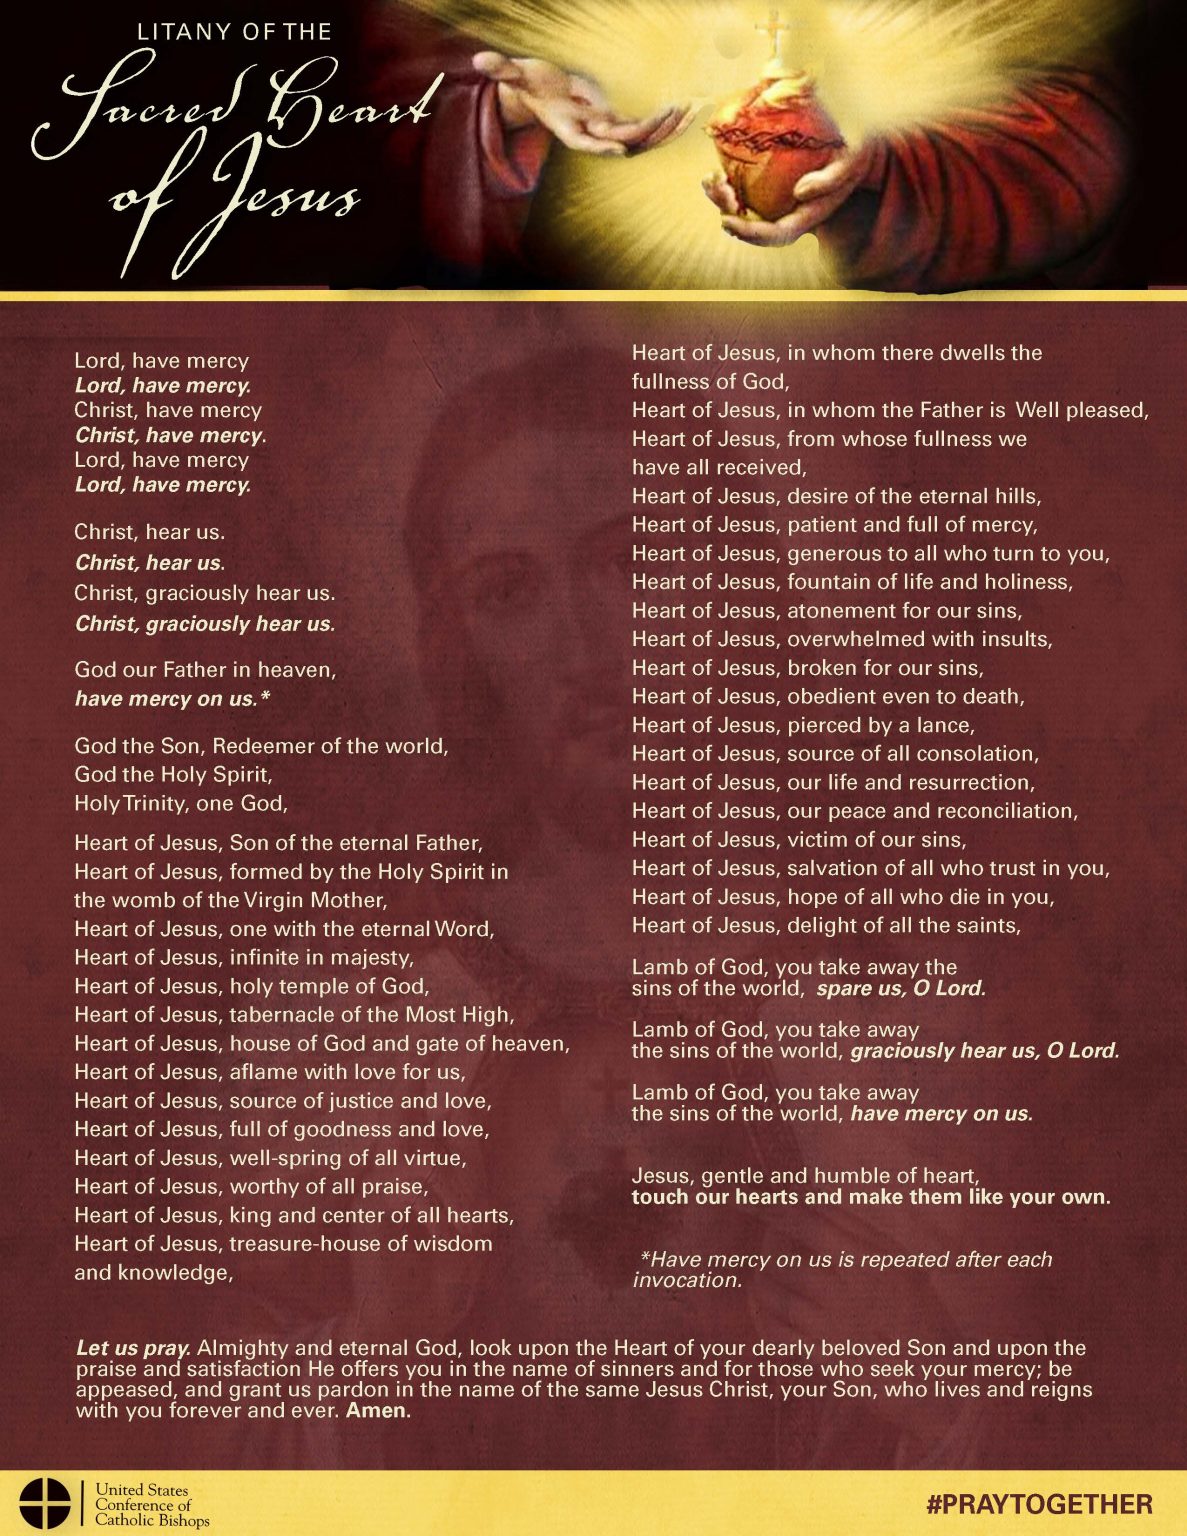 Litany of the Sacred Heart of Jesus on Good Friday Our Lady Queen of